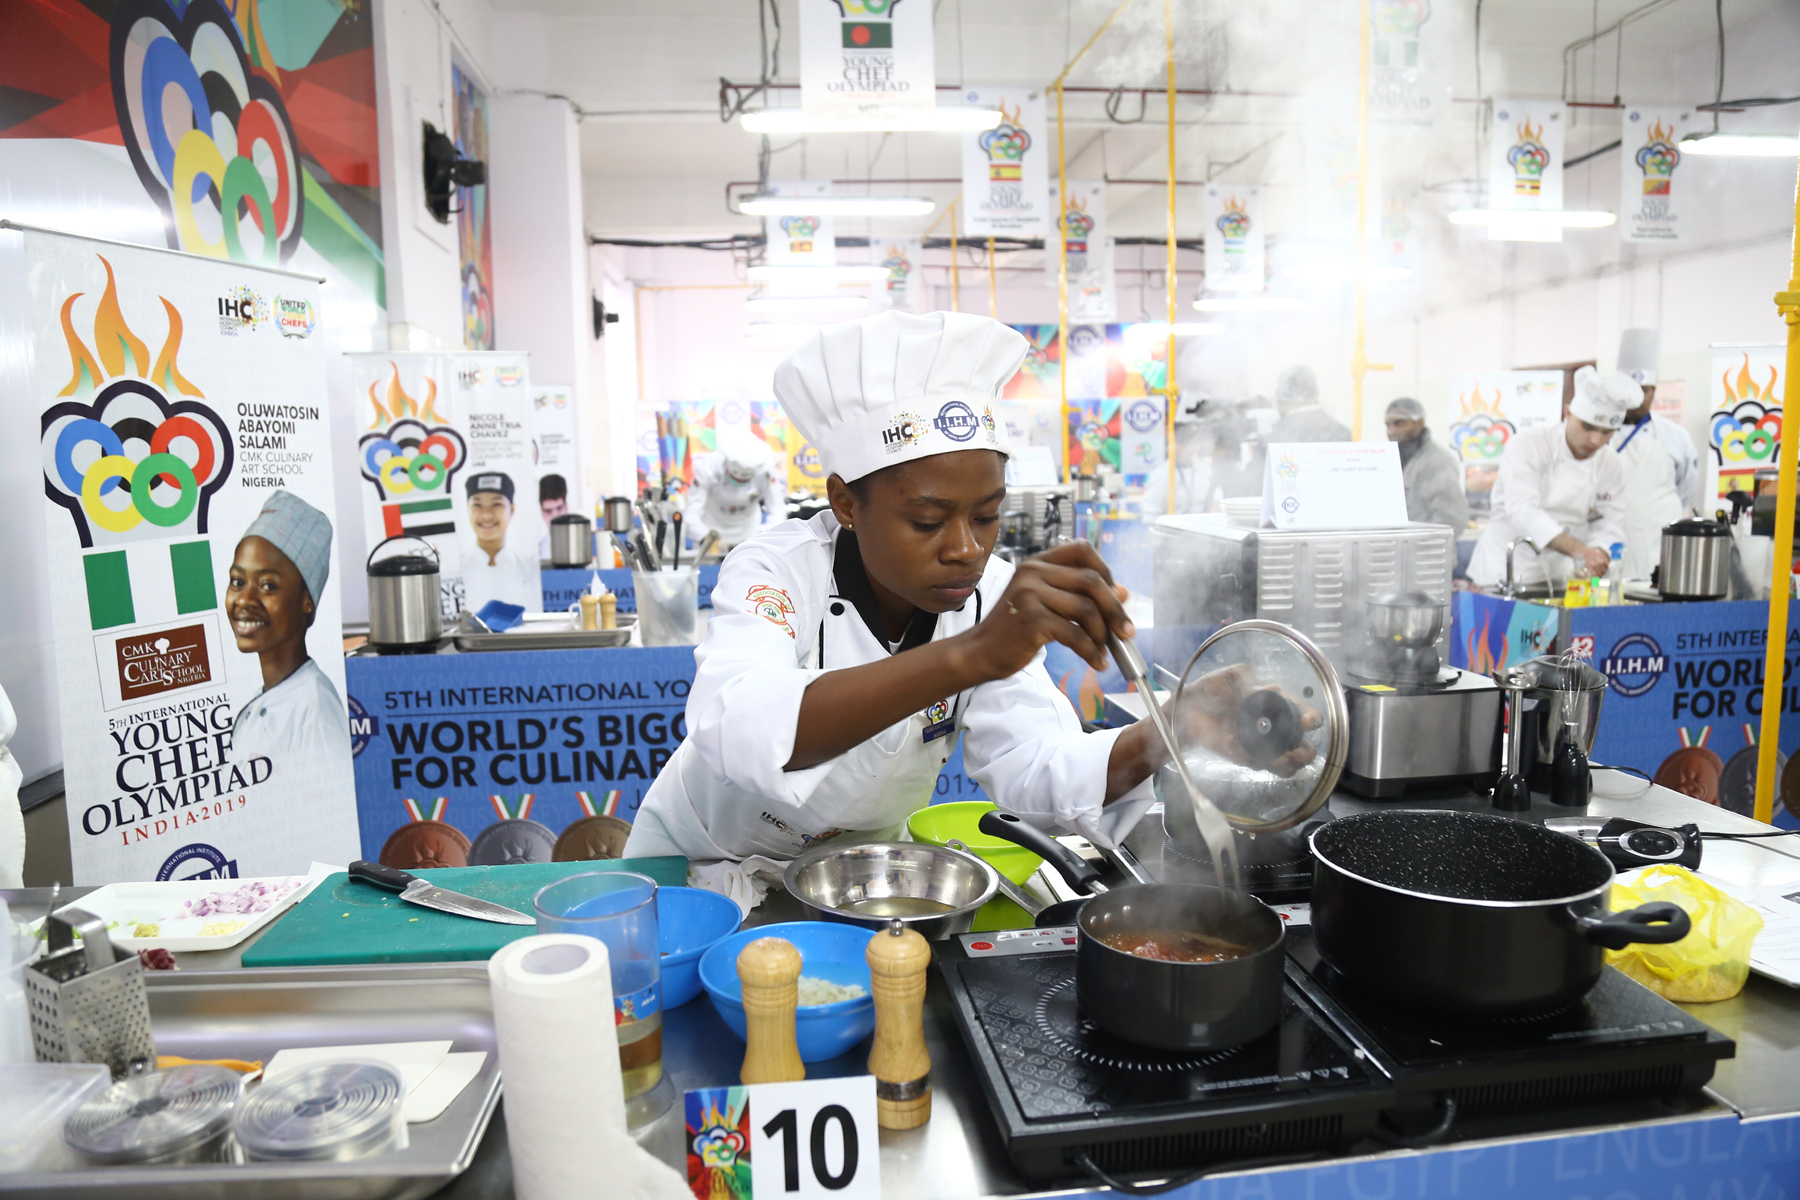 A glimpse of the International Young Chef Olympiad 2019